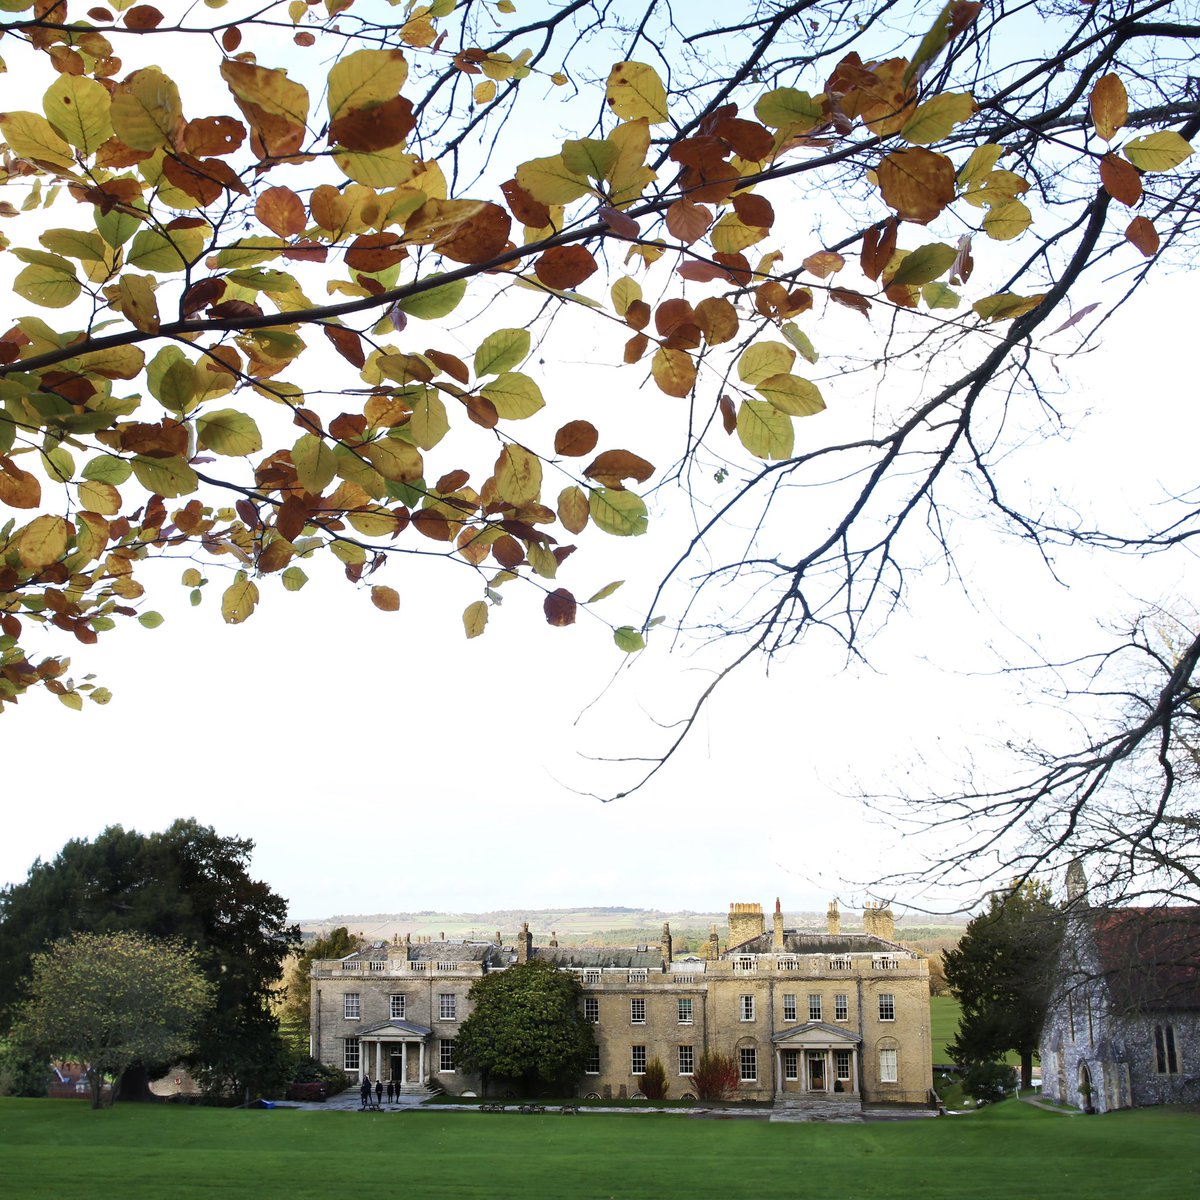 Welcome back to all of our students, parents and staff to our Autumn Term. Seaford looks amazing and is buzzing. It’s fantastic to see our students back on campus. Ad Alta everyone for the term ahead! #autumn #welcomeback